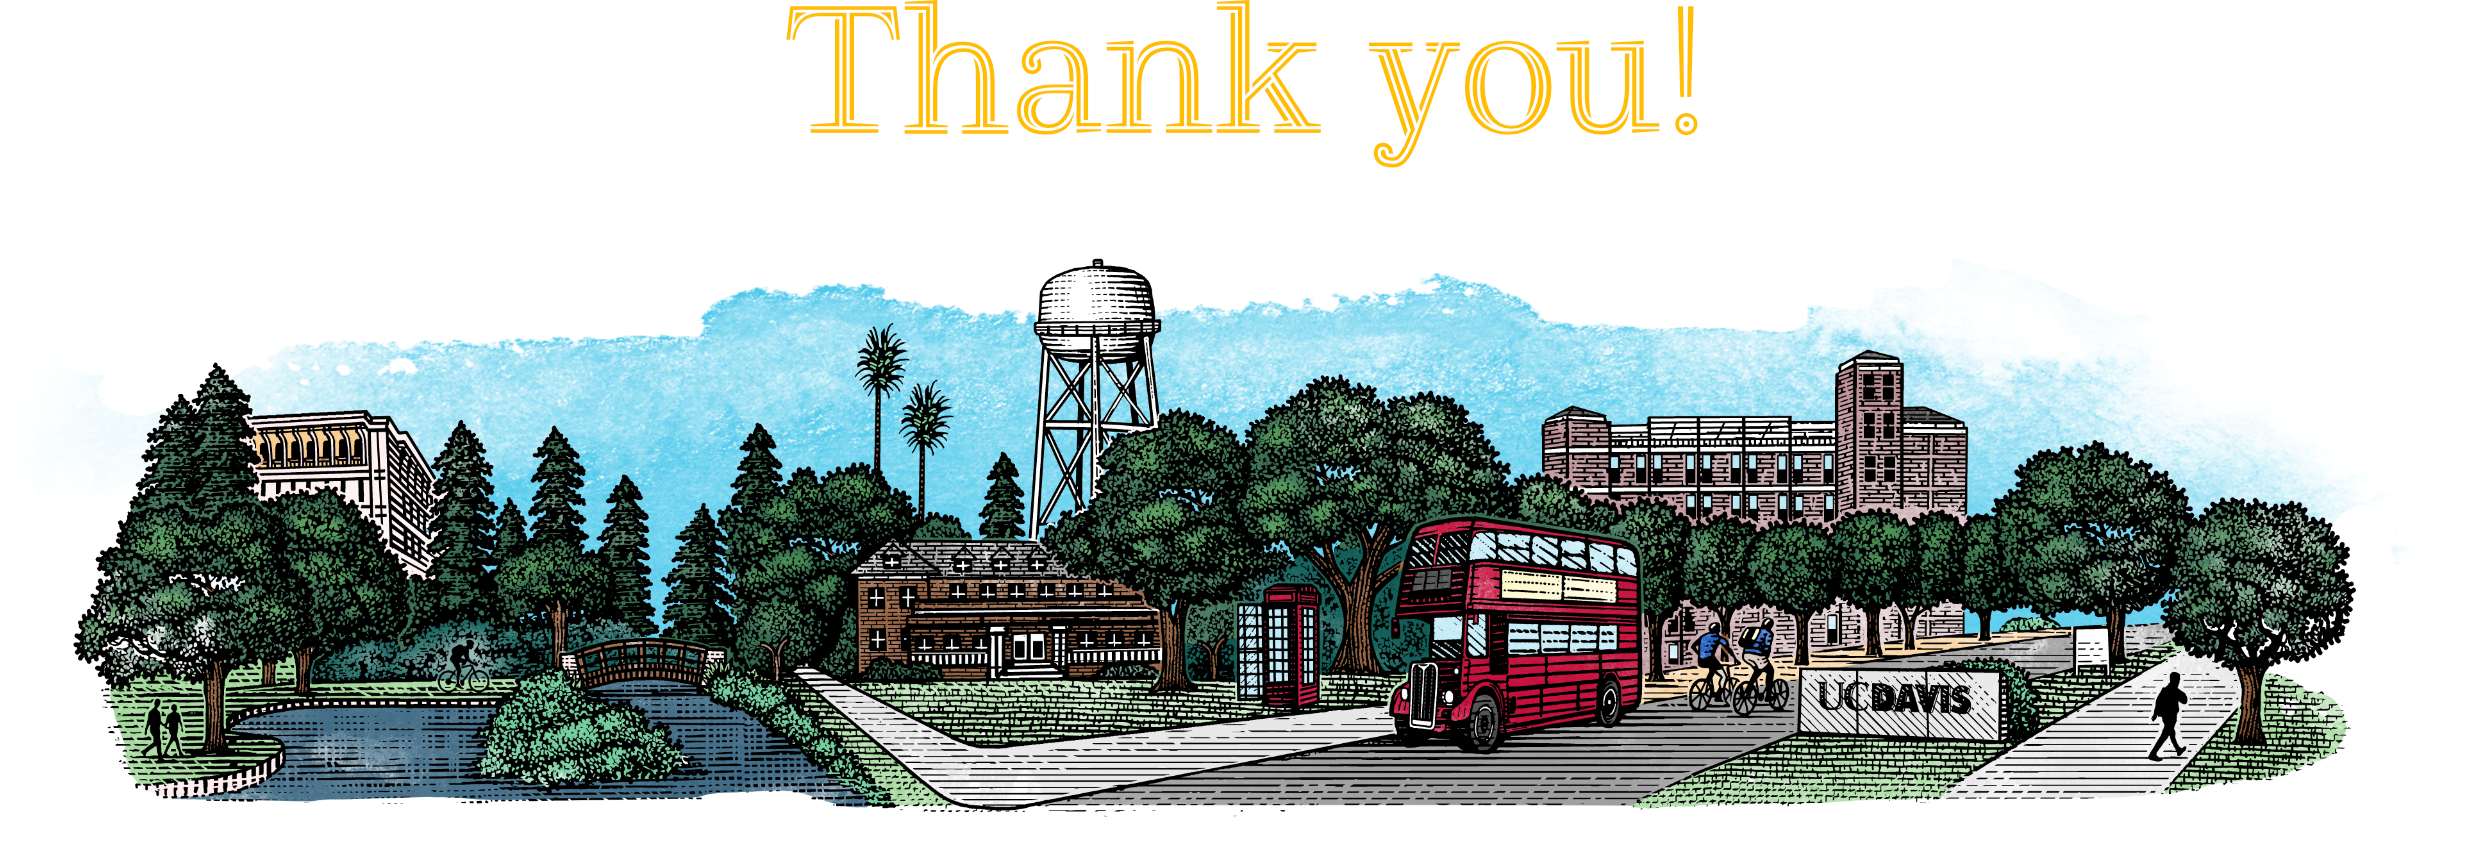 Large highlight text says "Thank You", above a stylized representation of the UC Davis Campus